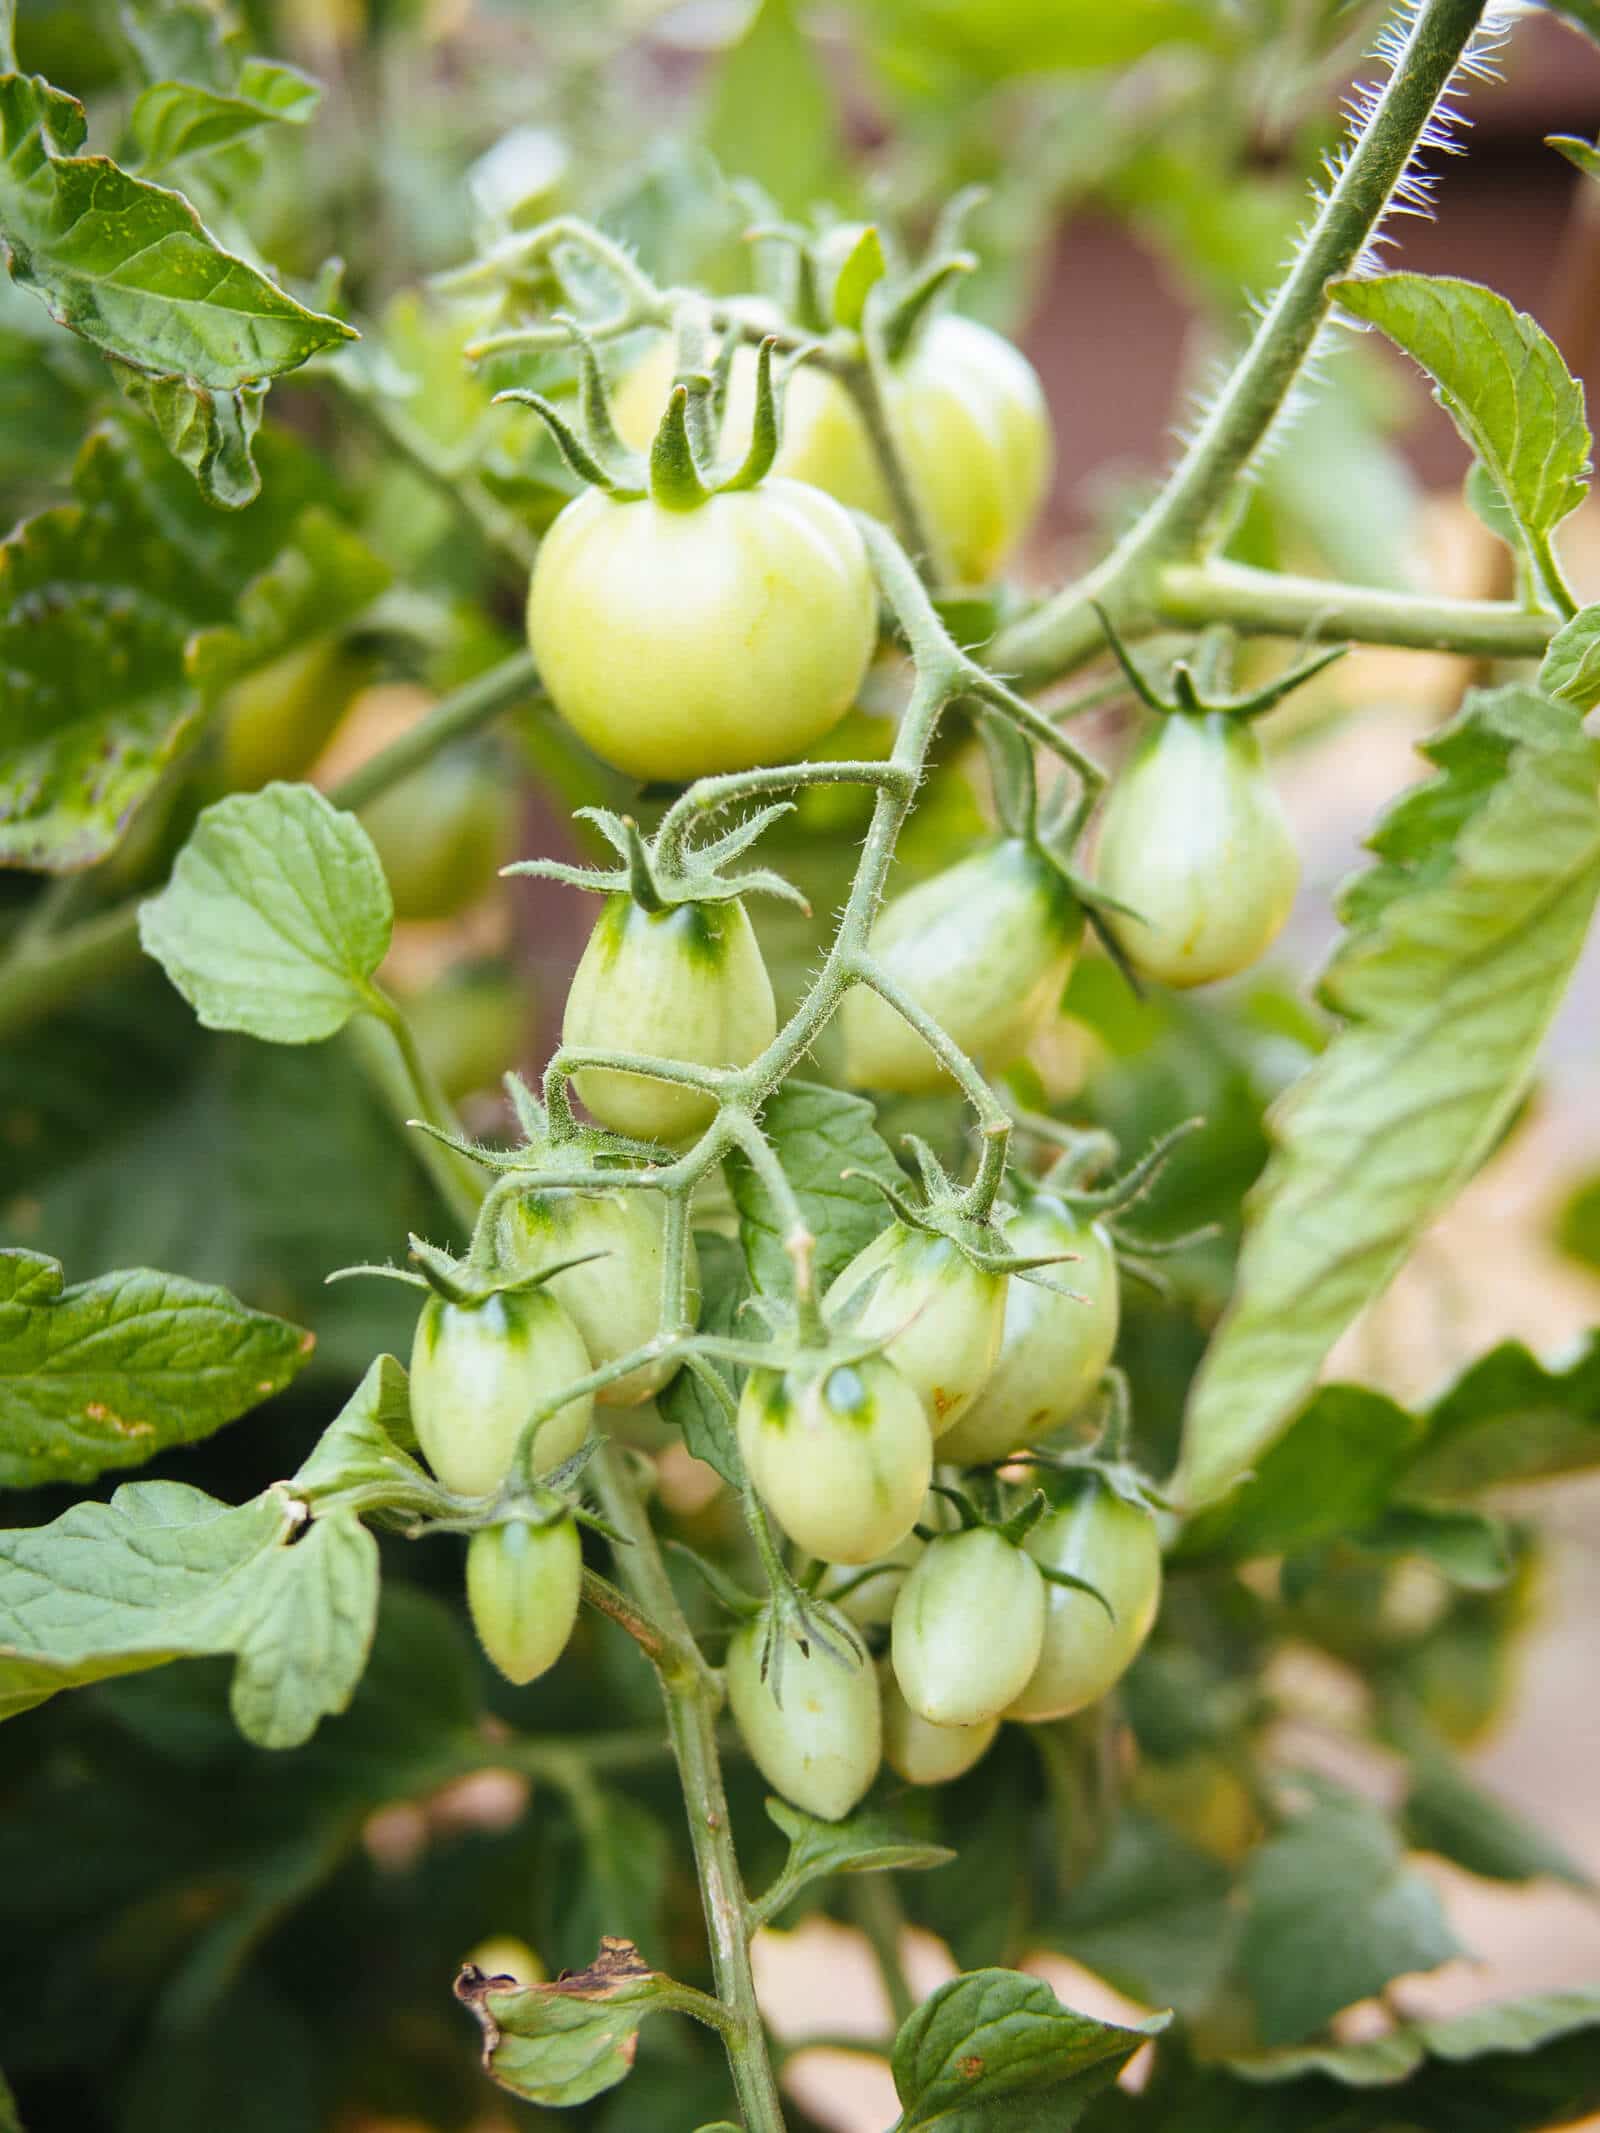 5Green tomatoes on the vine